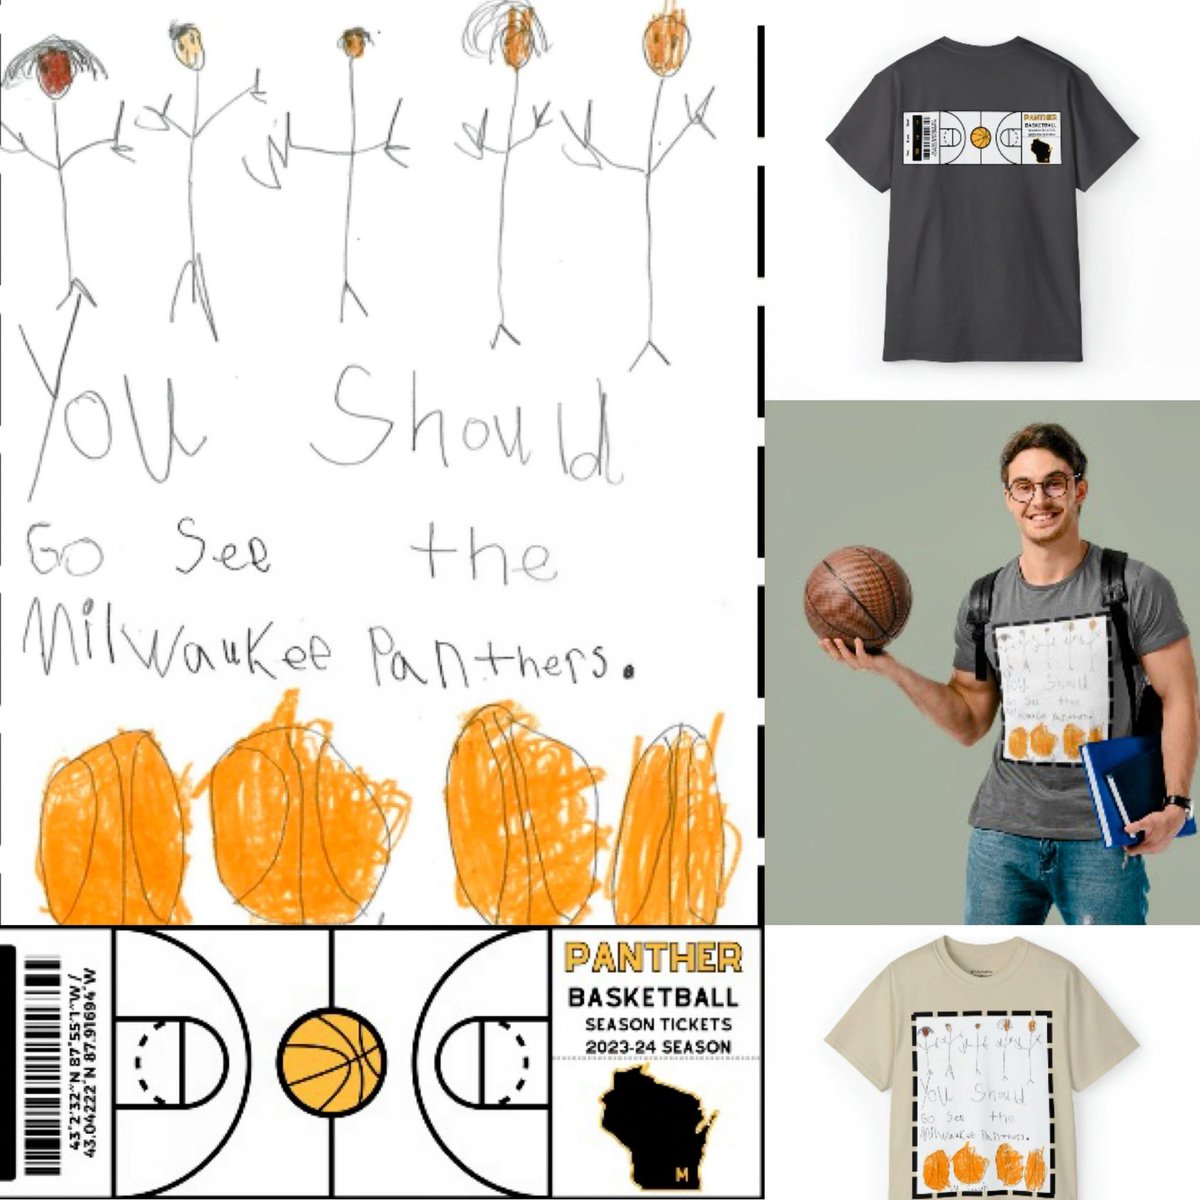 Show your #PantherPride with Gavin's Panther Pride T-Shirt! Designed by the talented young student Gavin, this tee is the ultimate way to display your ❤️ for the Panthers. Follow Gavin’s advice and head to @UWMPantherArena this season! #ForTheMKE #mkebasketball #InBartWeTrust